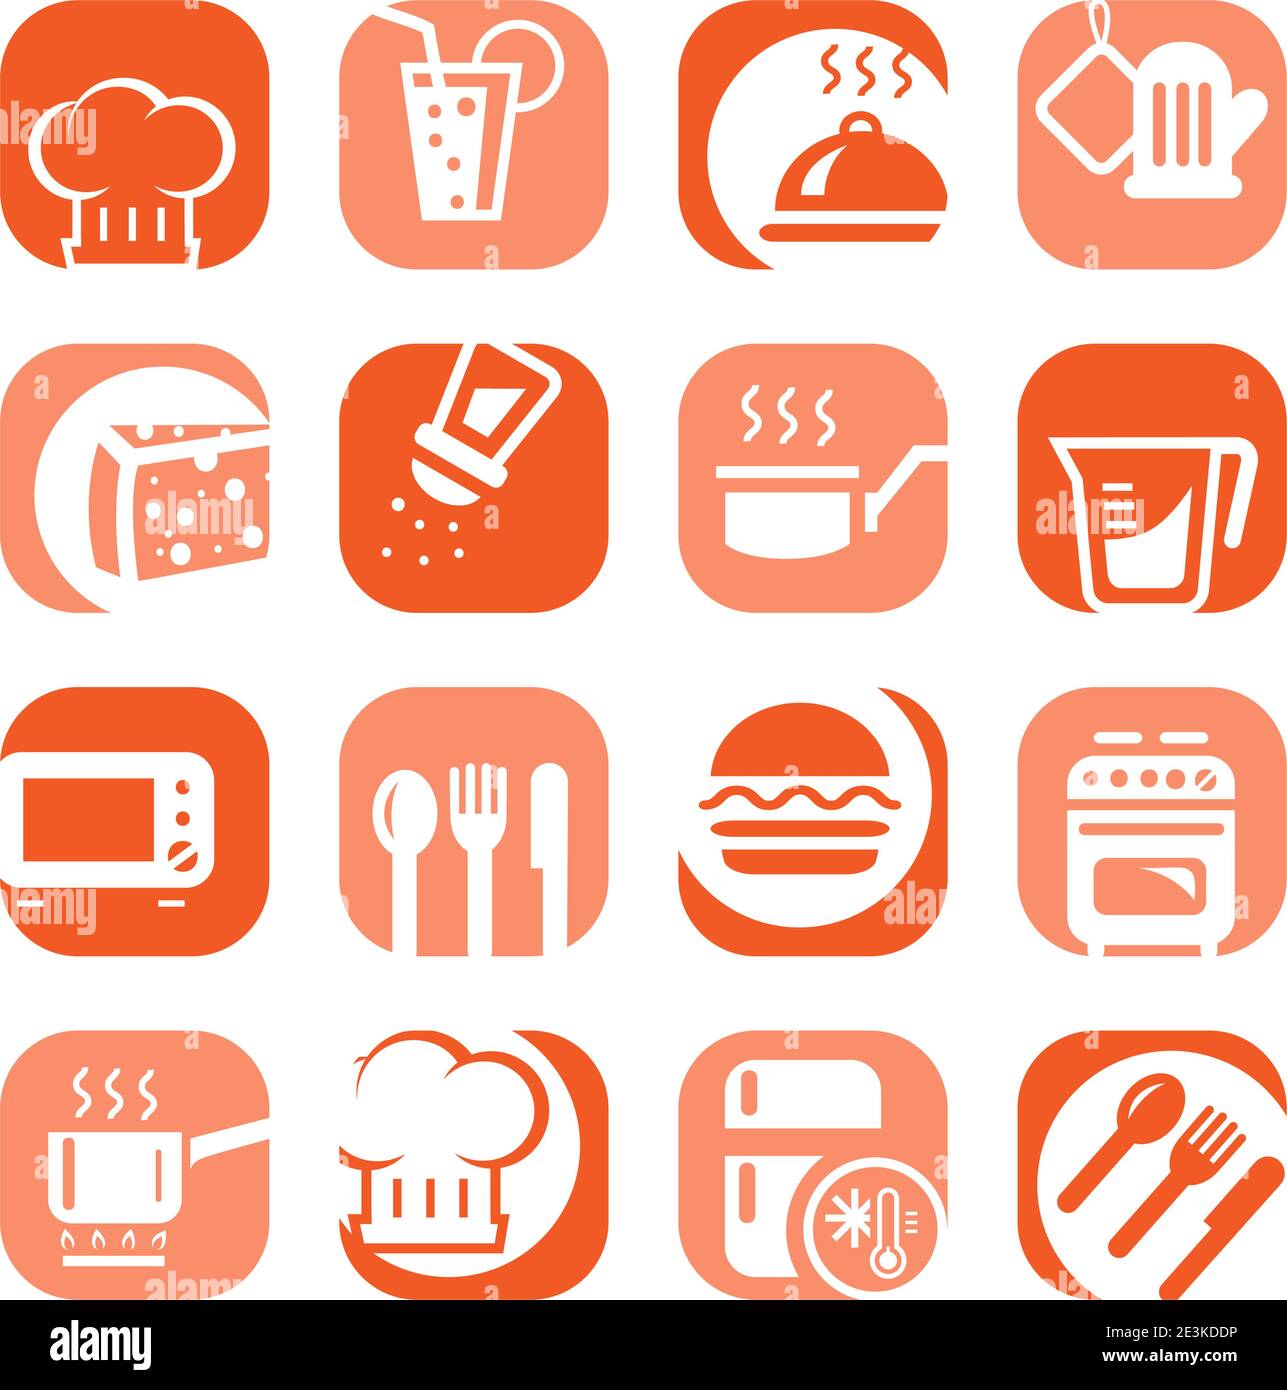 Elegant Colorful Kitchen Icons Set Created For Mobile, Web And Applications. Stock Vector